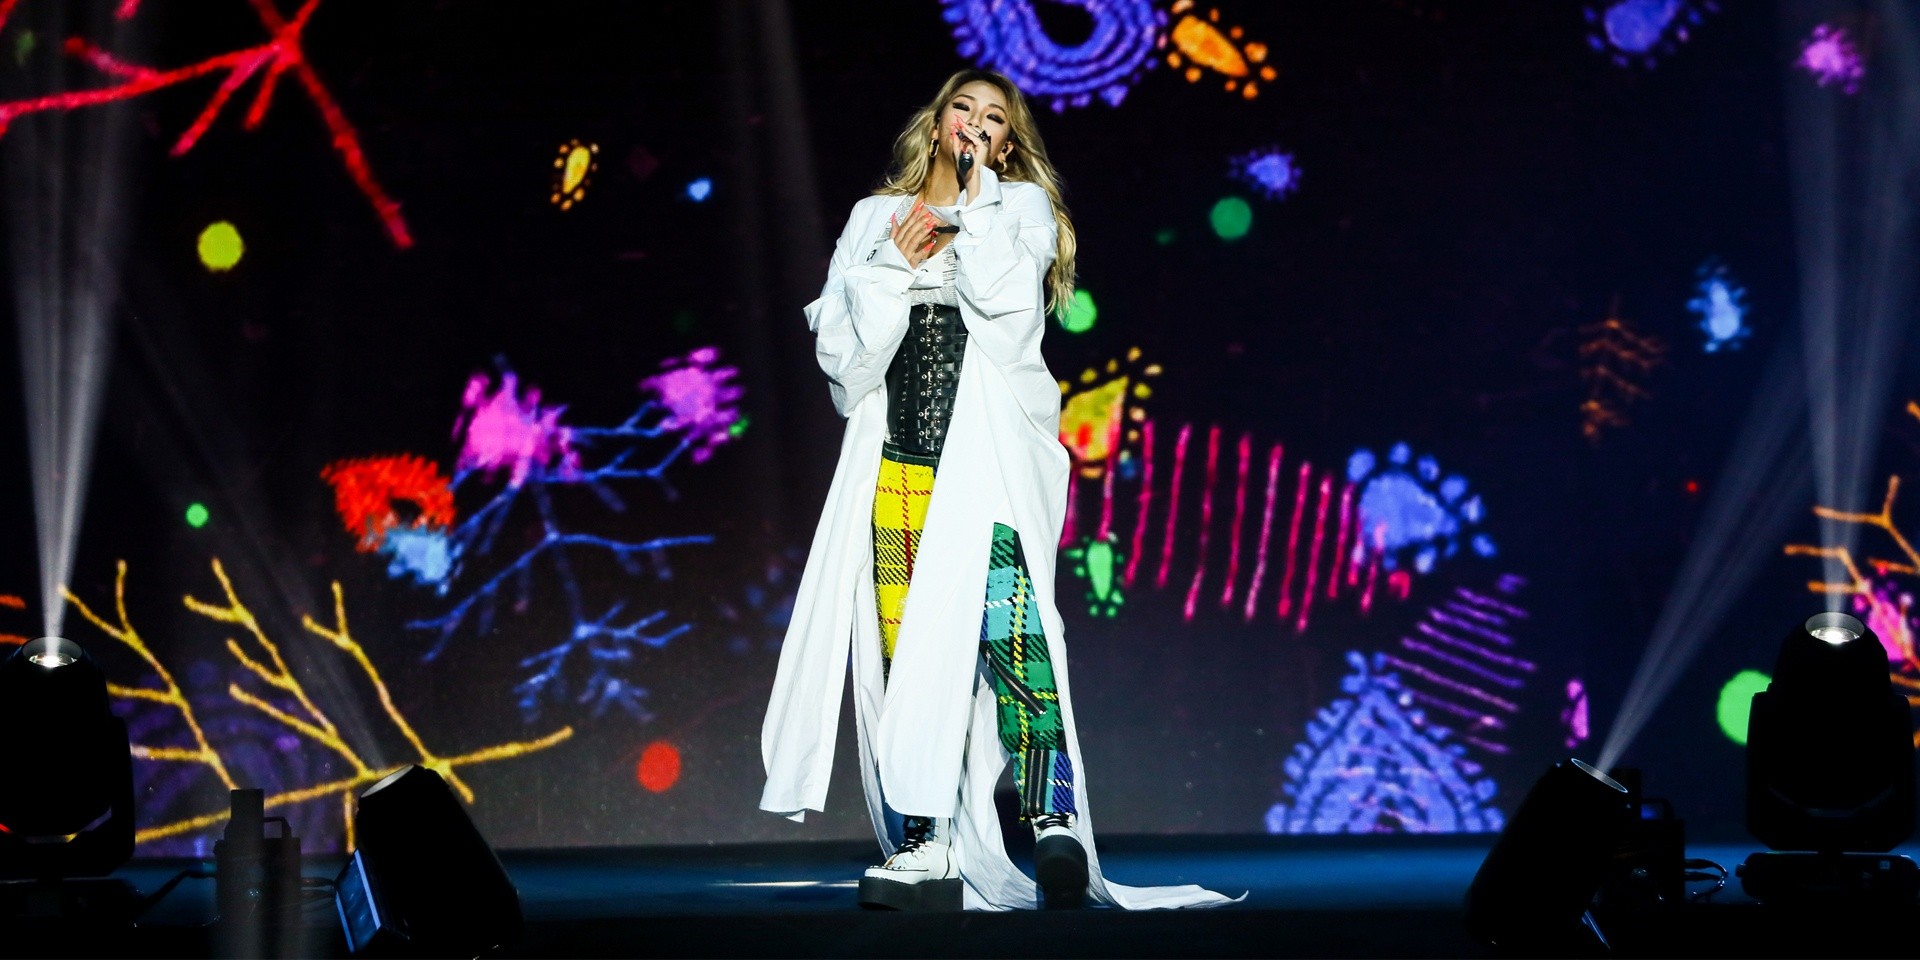 Thrilling performances from CL, Nick Jonas and more up the ante at Hyperplay – festival report